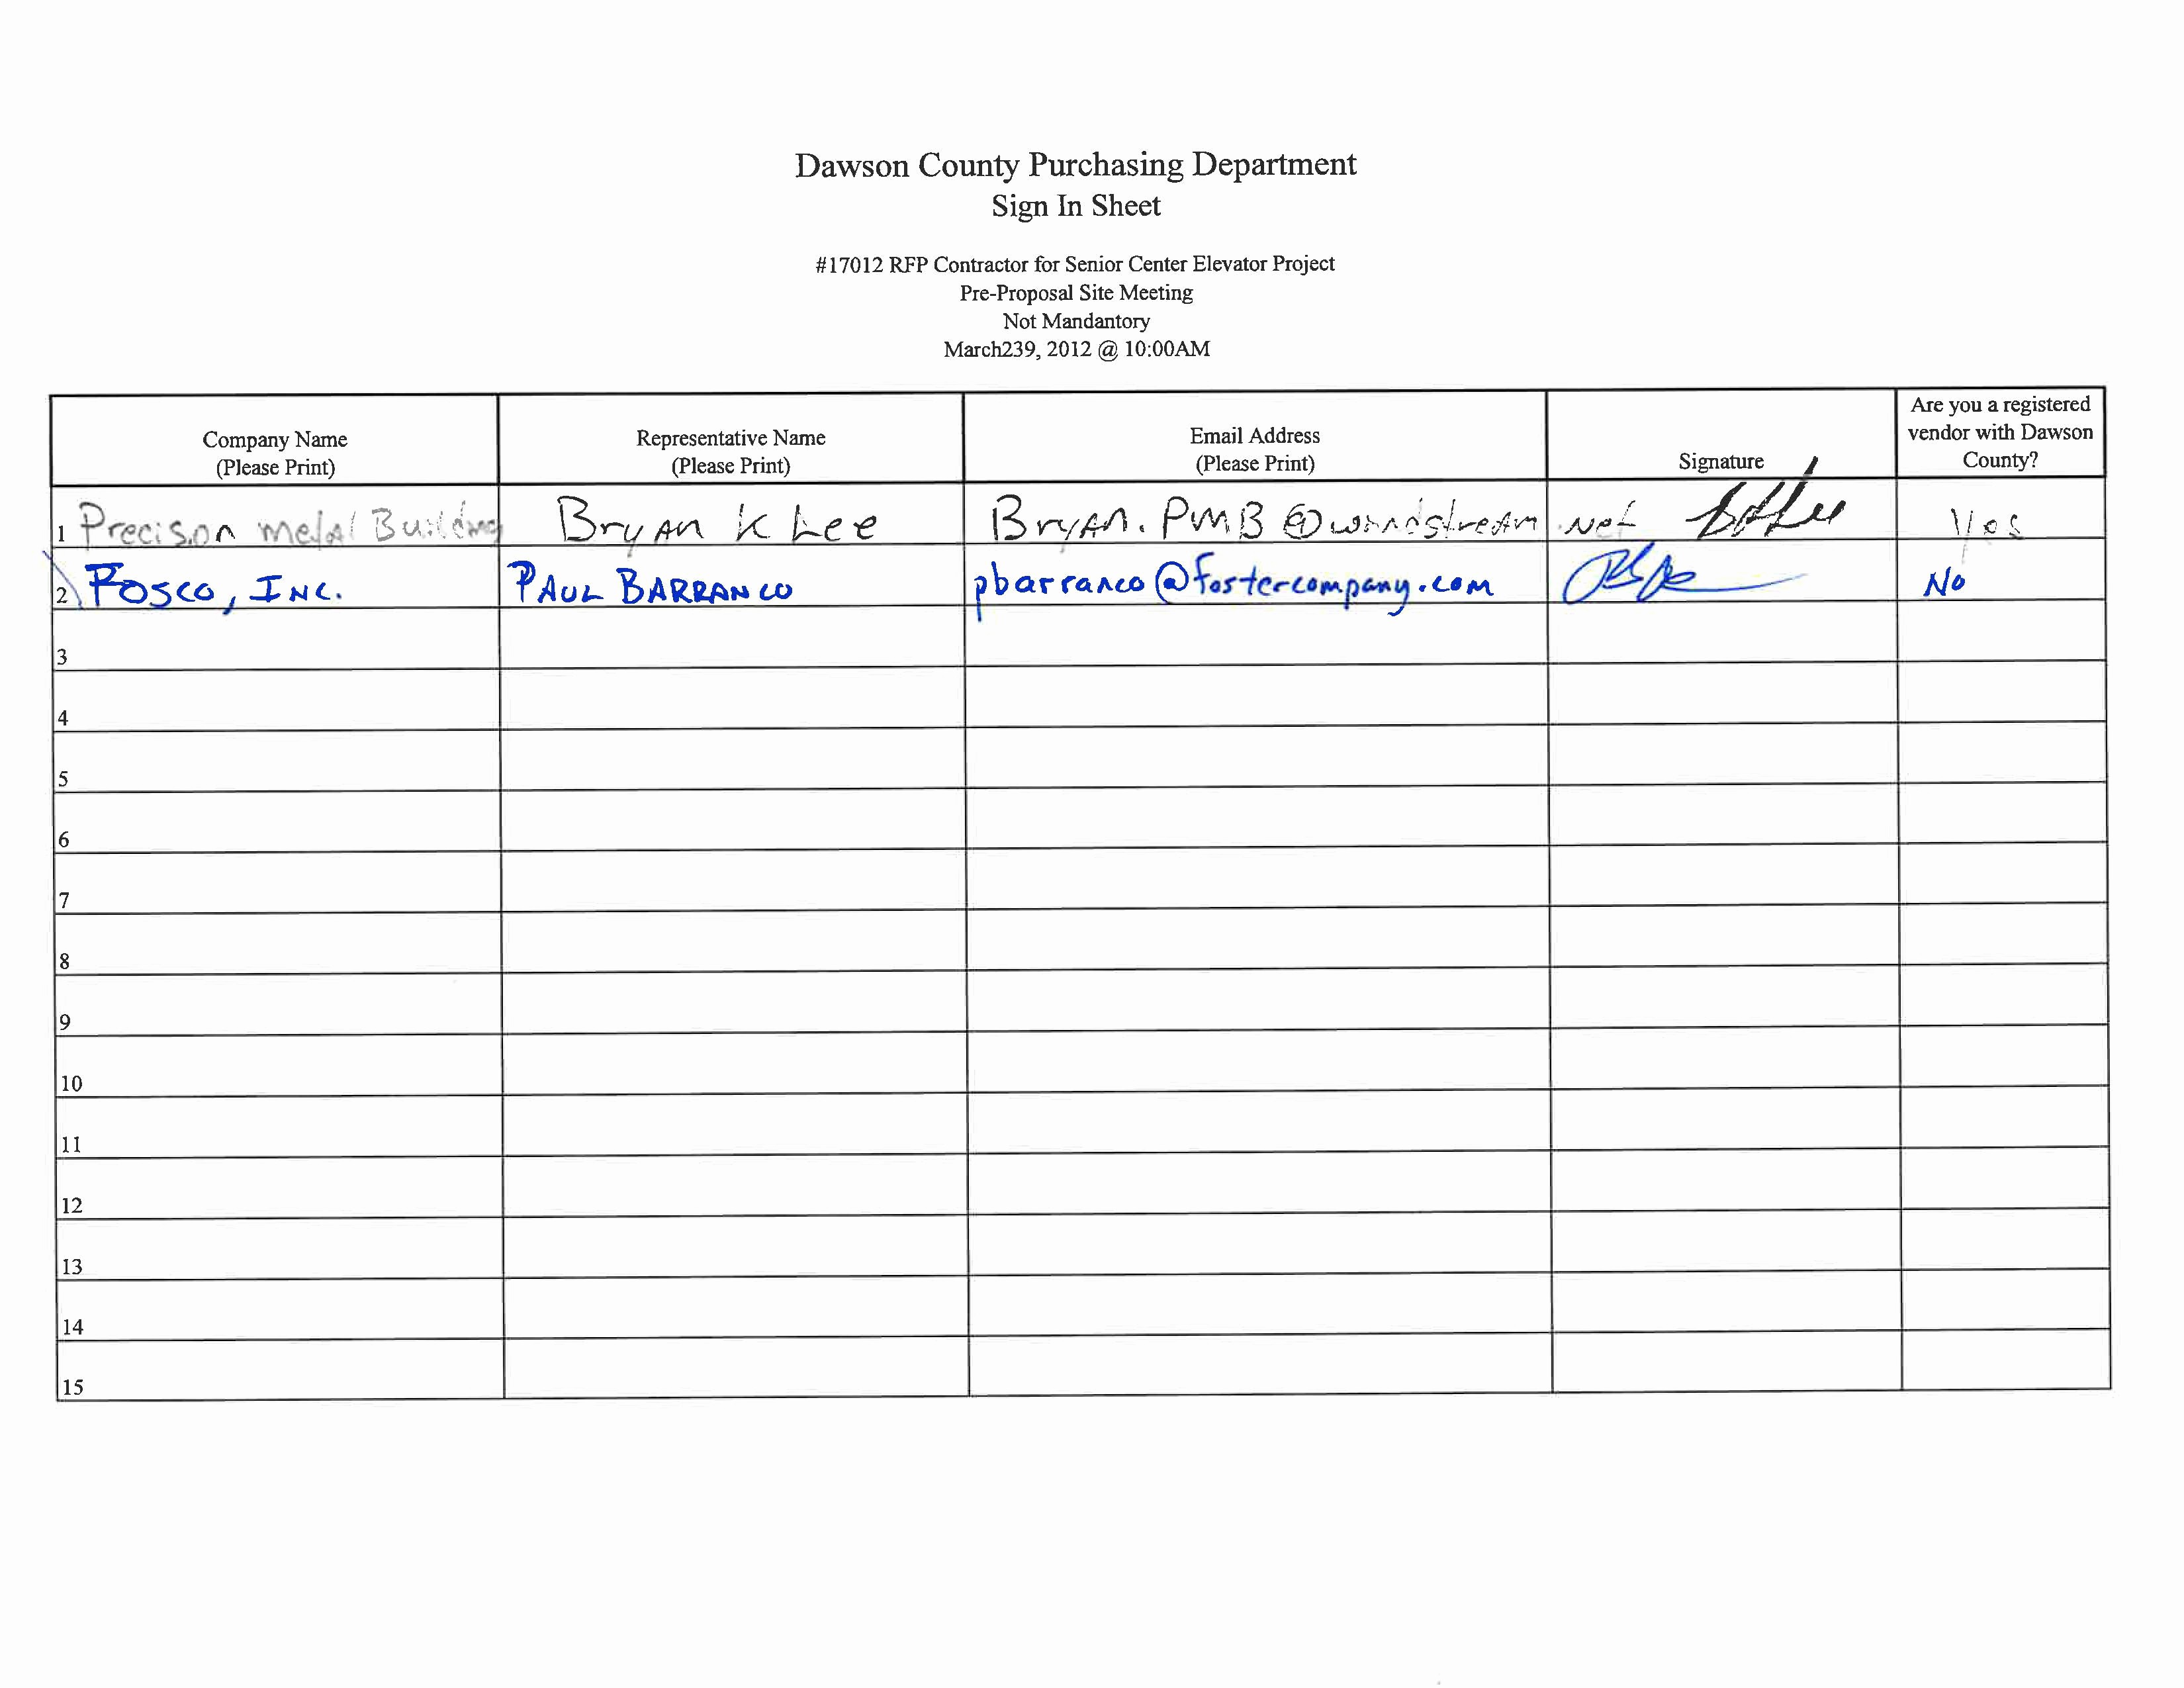 Contractor Sign In Sheet Template Inspirational 170 12 Rfp Contractor for Senior Center Elevator Project